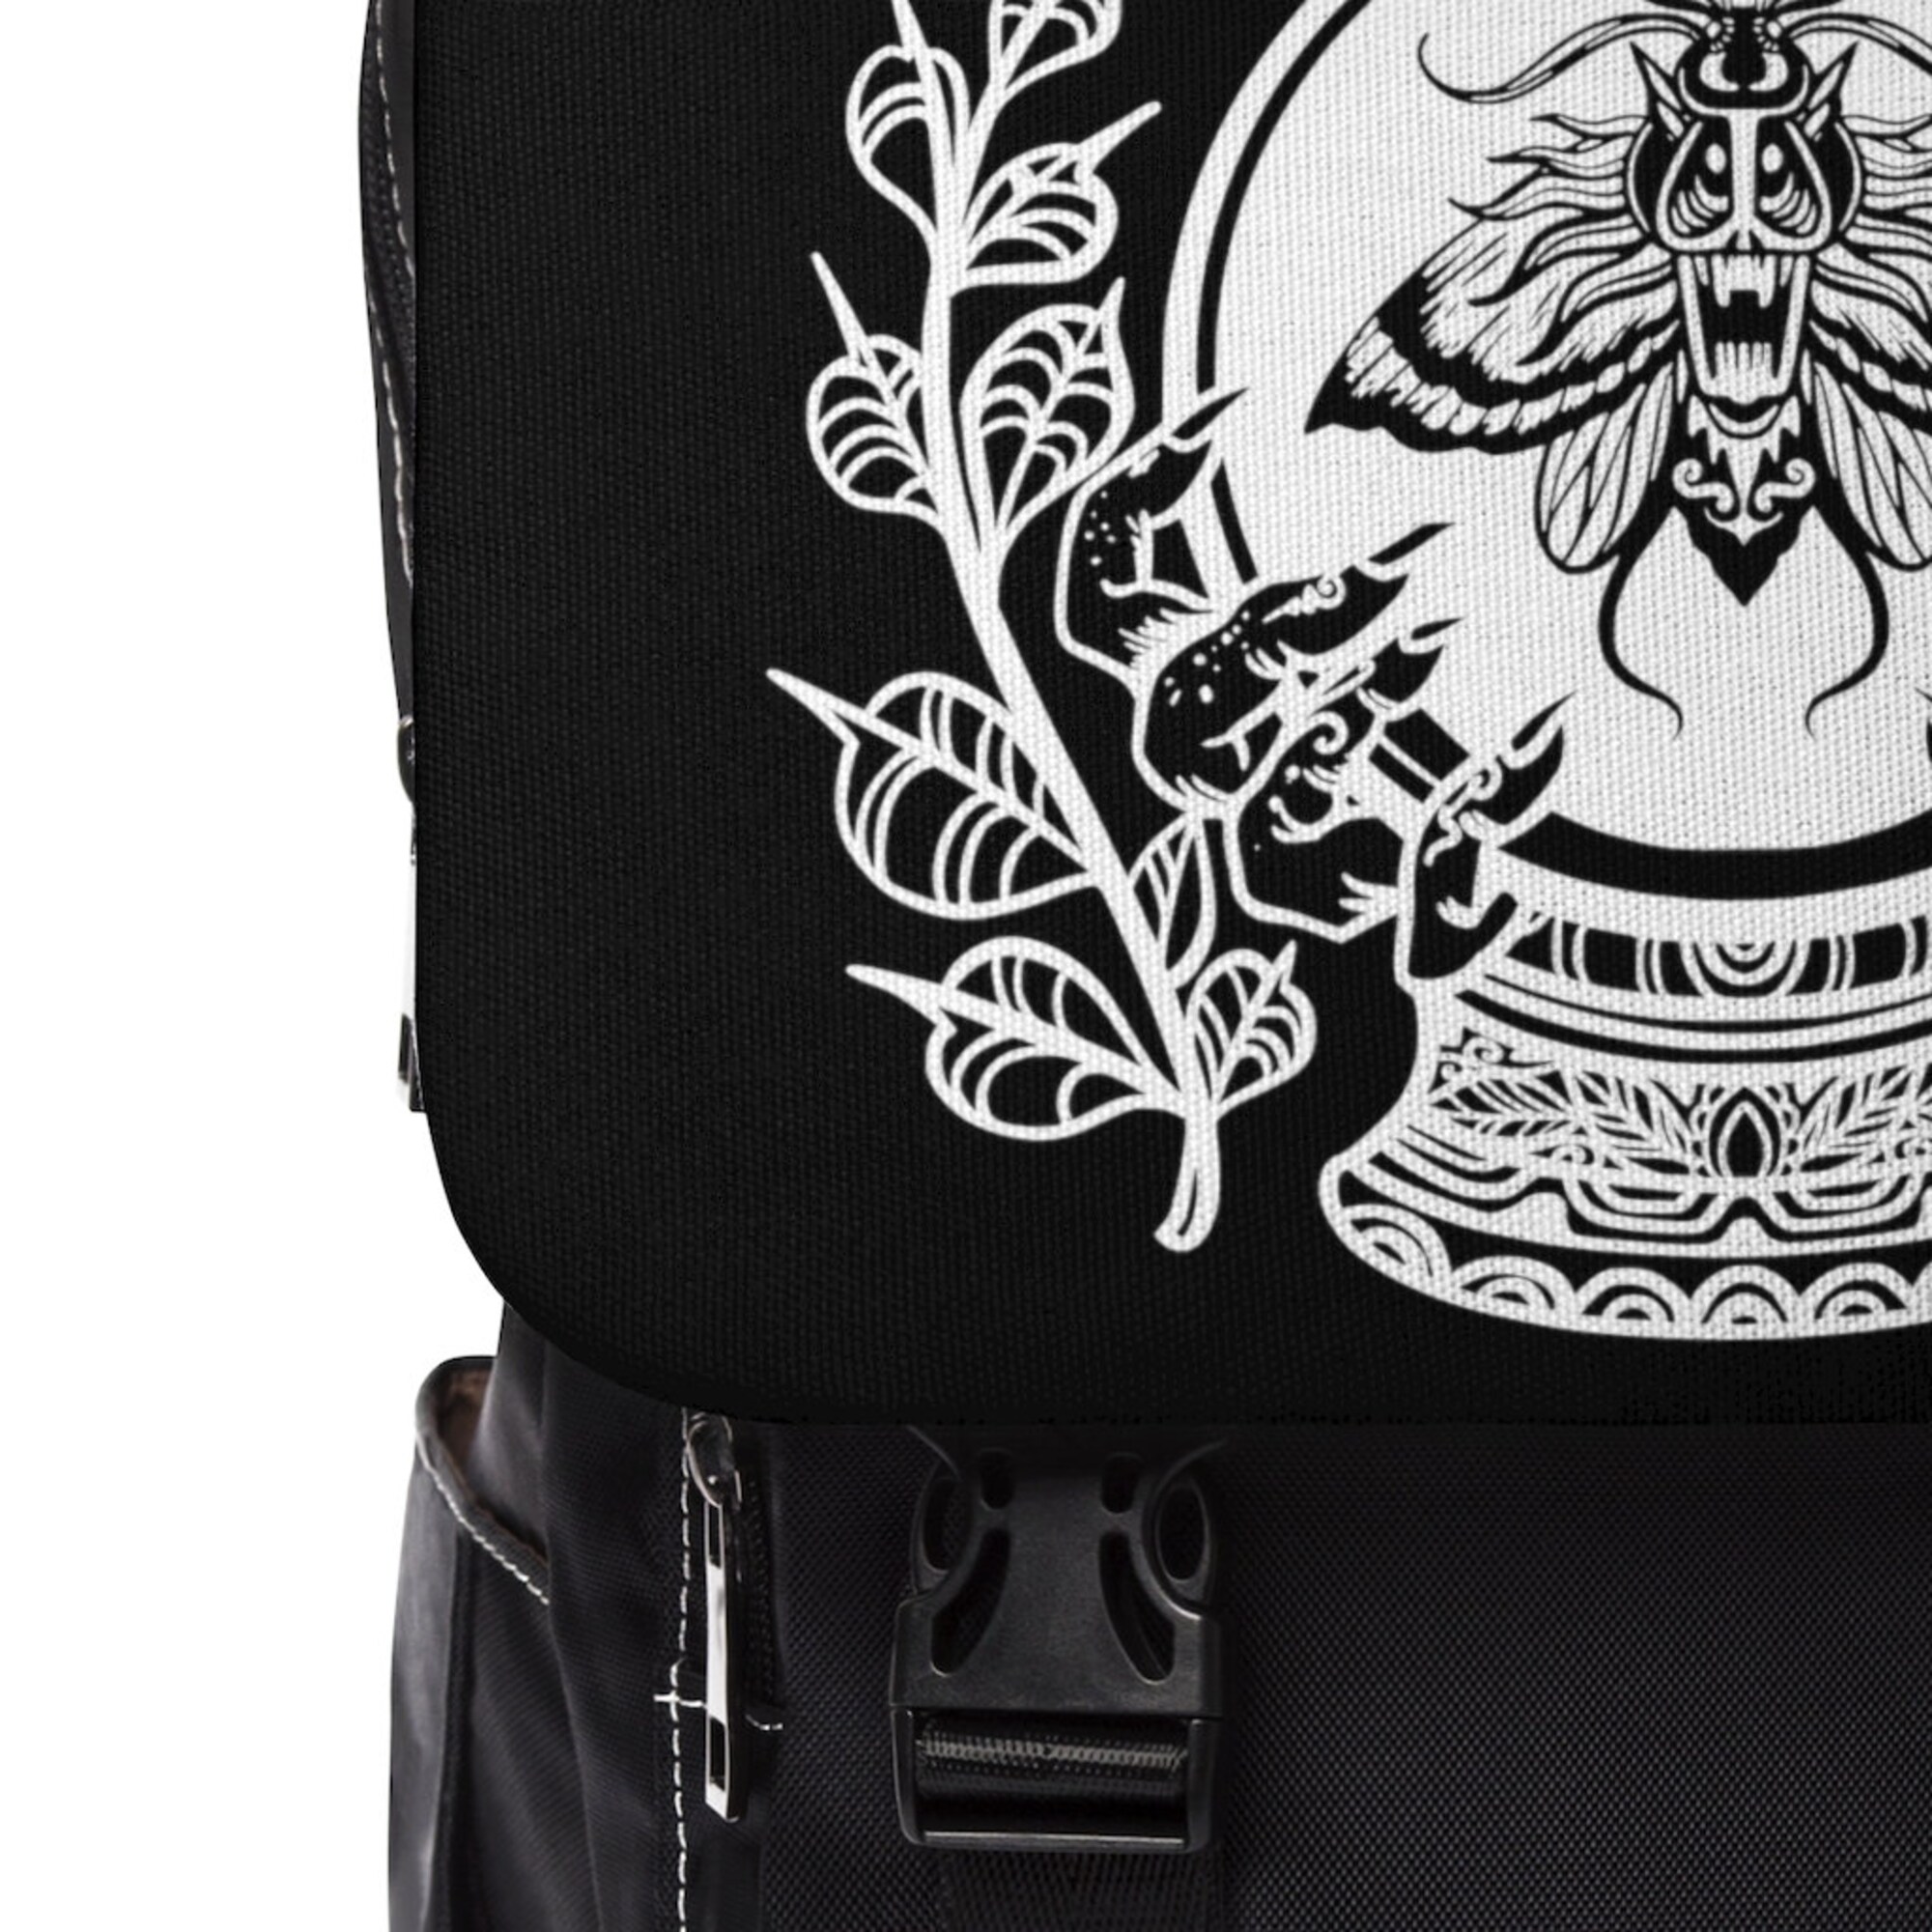 Lunar Cycles Death Moth Goth Crystal Ball Occult Butterfly Wiccan Wicca Witchy Gothic Unisex Casual Shoulder Backpack